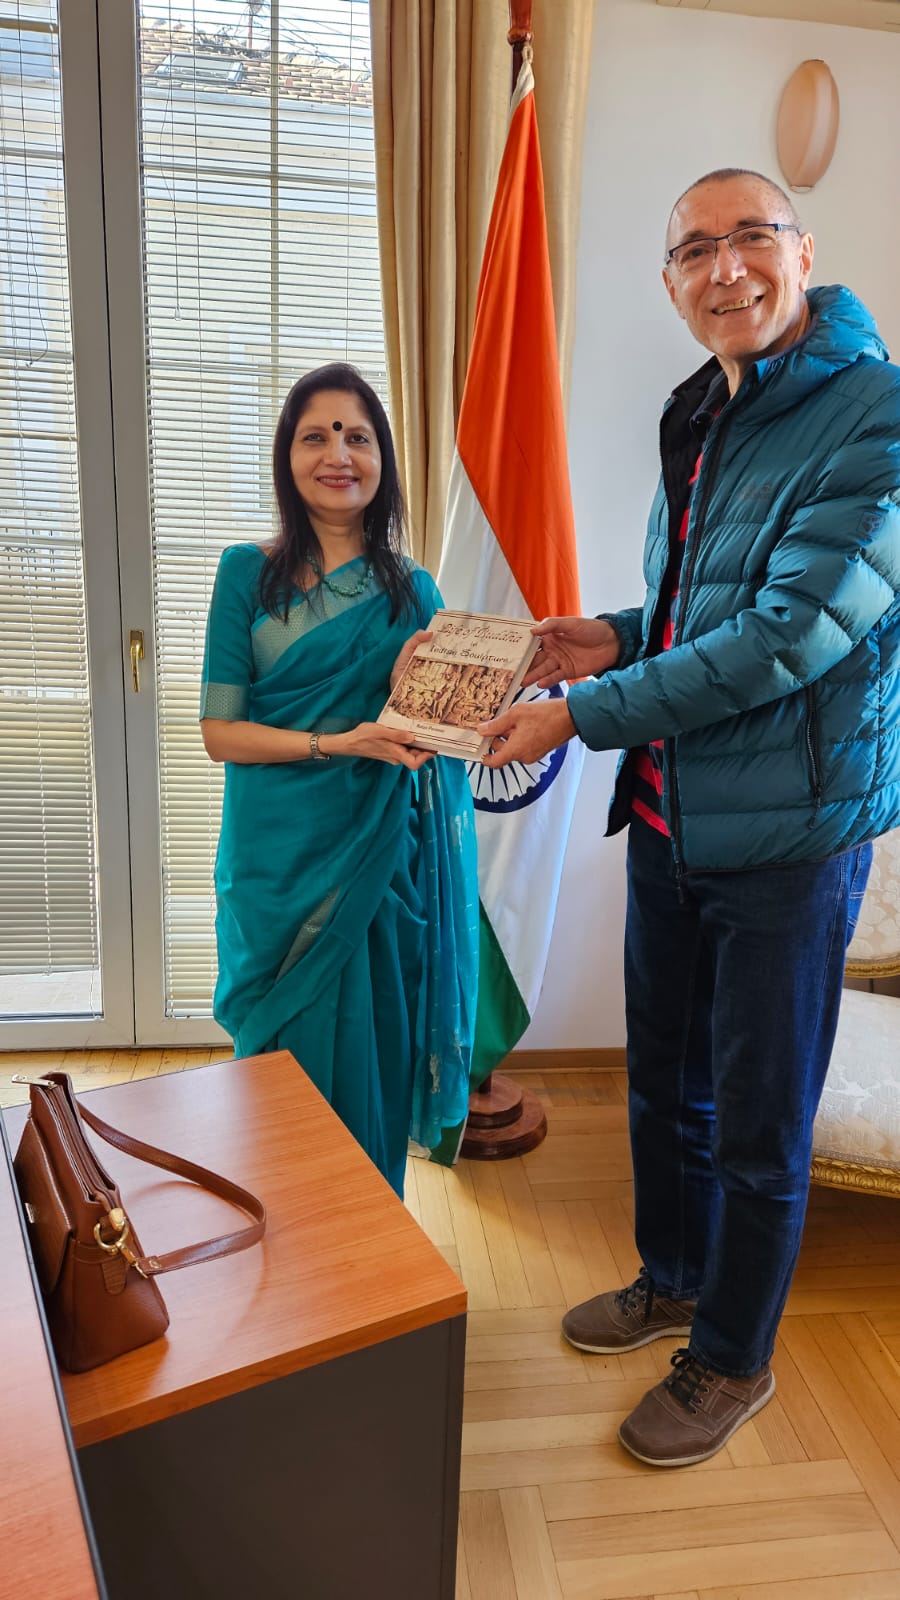 Embassy of India gifted books to the library of the Faculty of Philology in University of Belgrade, Theravada Buddhist Community Centre in Novisad, the Adligat Library, Museum of Serbian Literature Book and Travel Museum, Belgrade, to the Students and teachers of Branko Radicevic Elementary School, Belgrade and Maya Media, Belgrade to publicize Indian history, Culture and Tradition - 19 October 2023